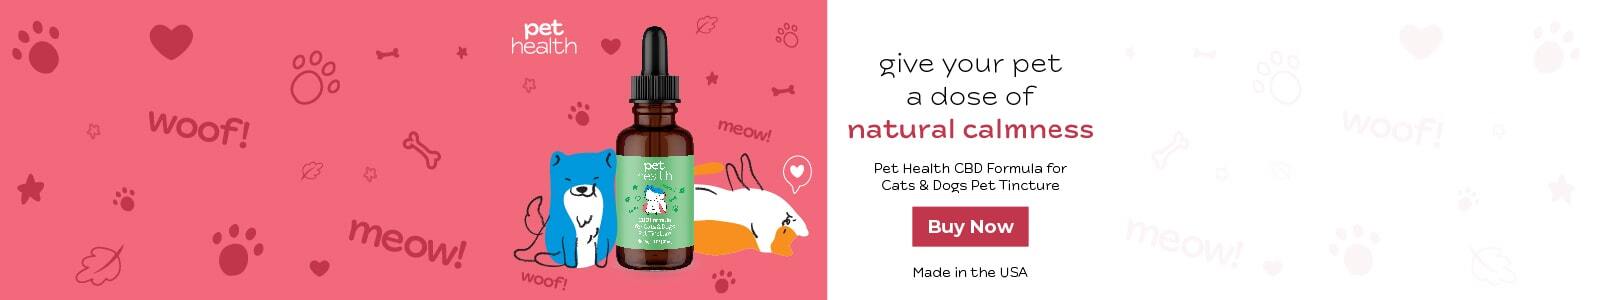 Pet Health CBD Formula for Cats & Dogs Pet Tincture Give your pet a dose of natural calmness Buy Now Made in the USA